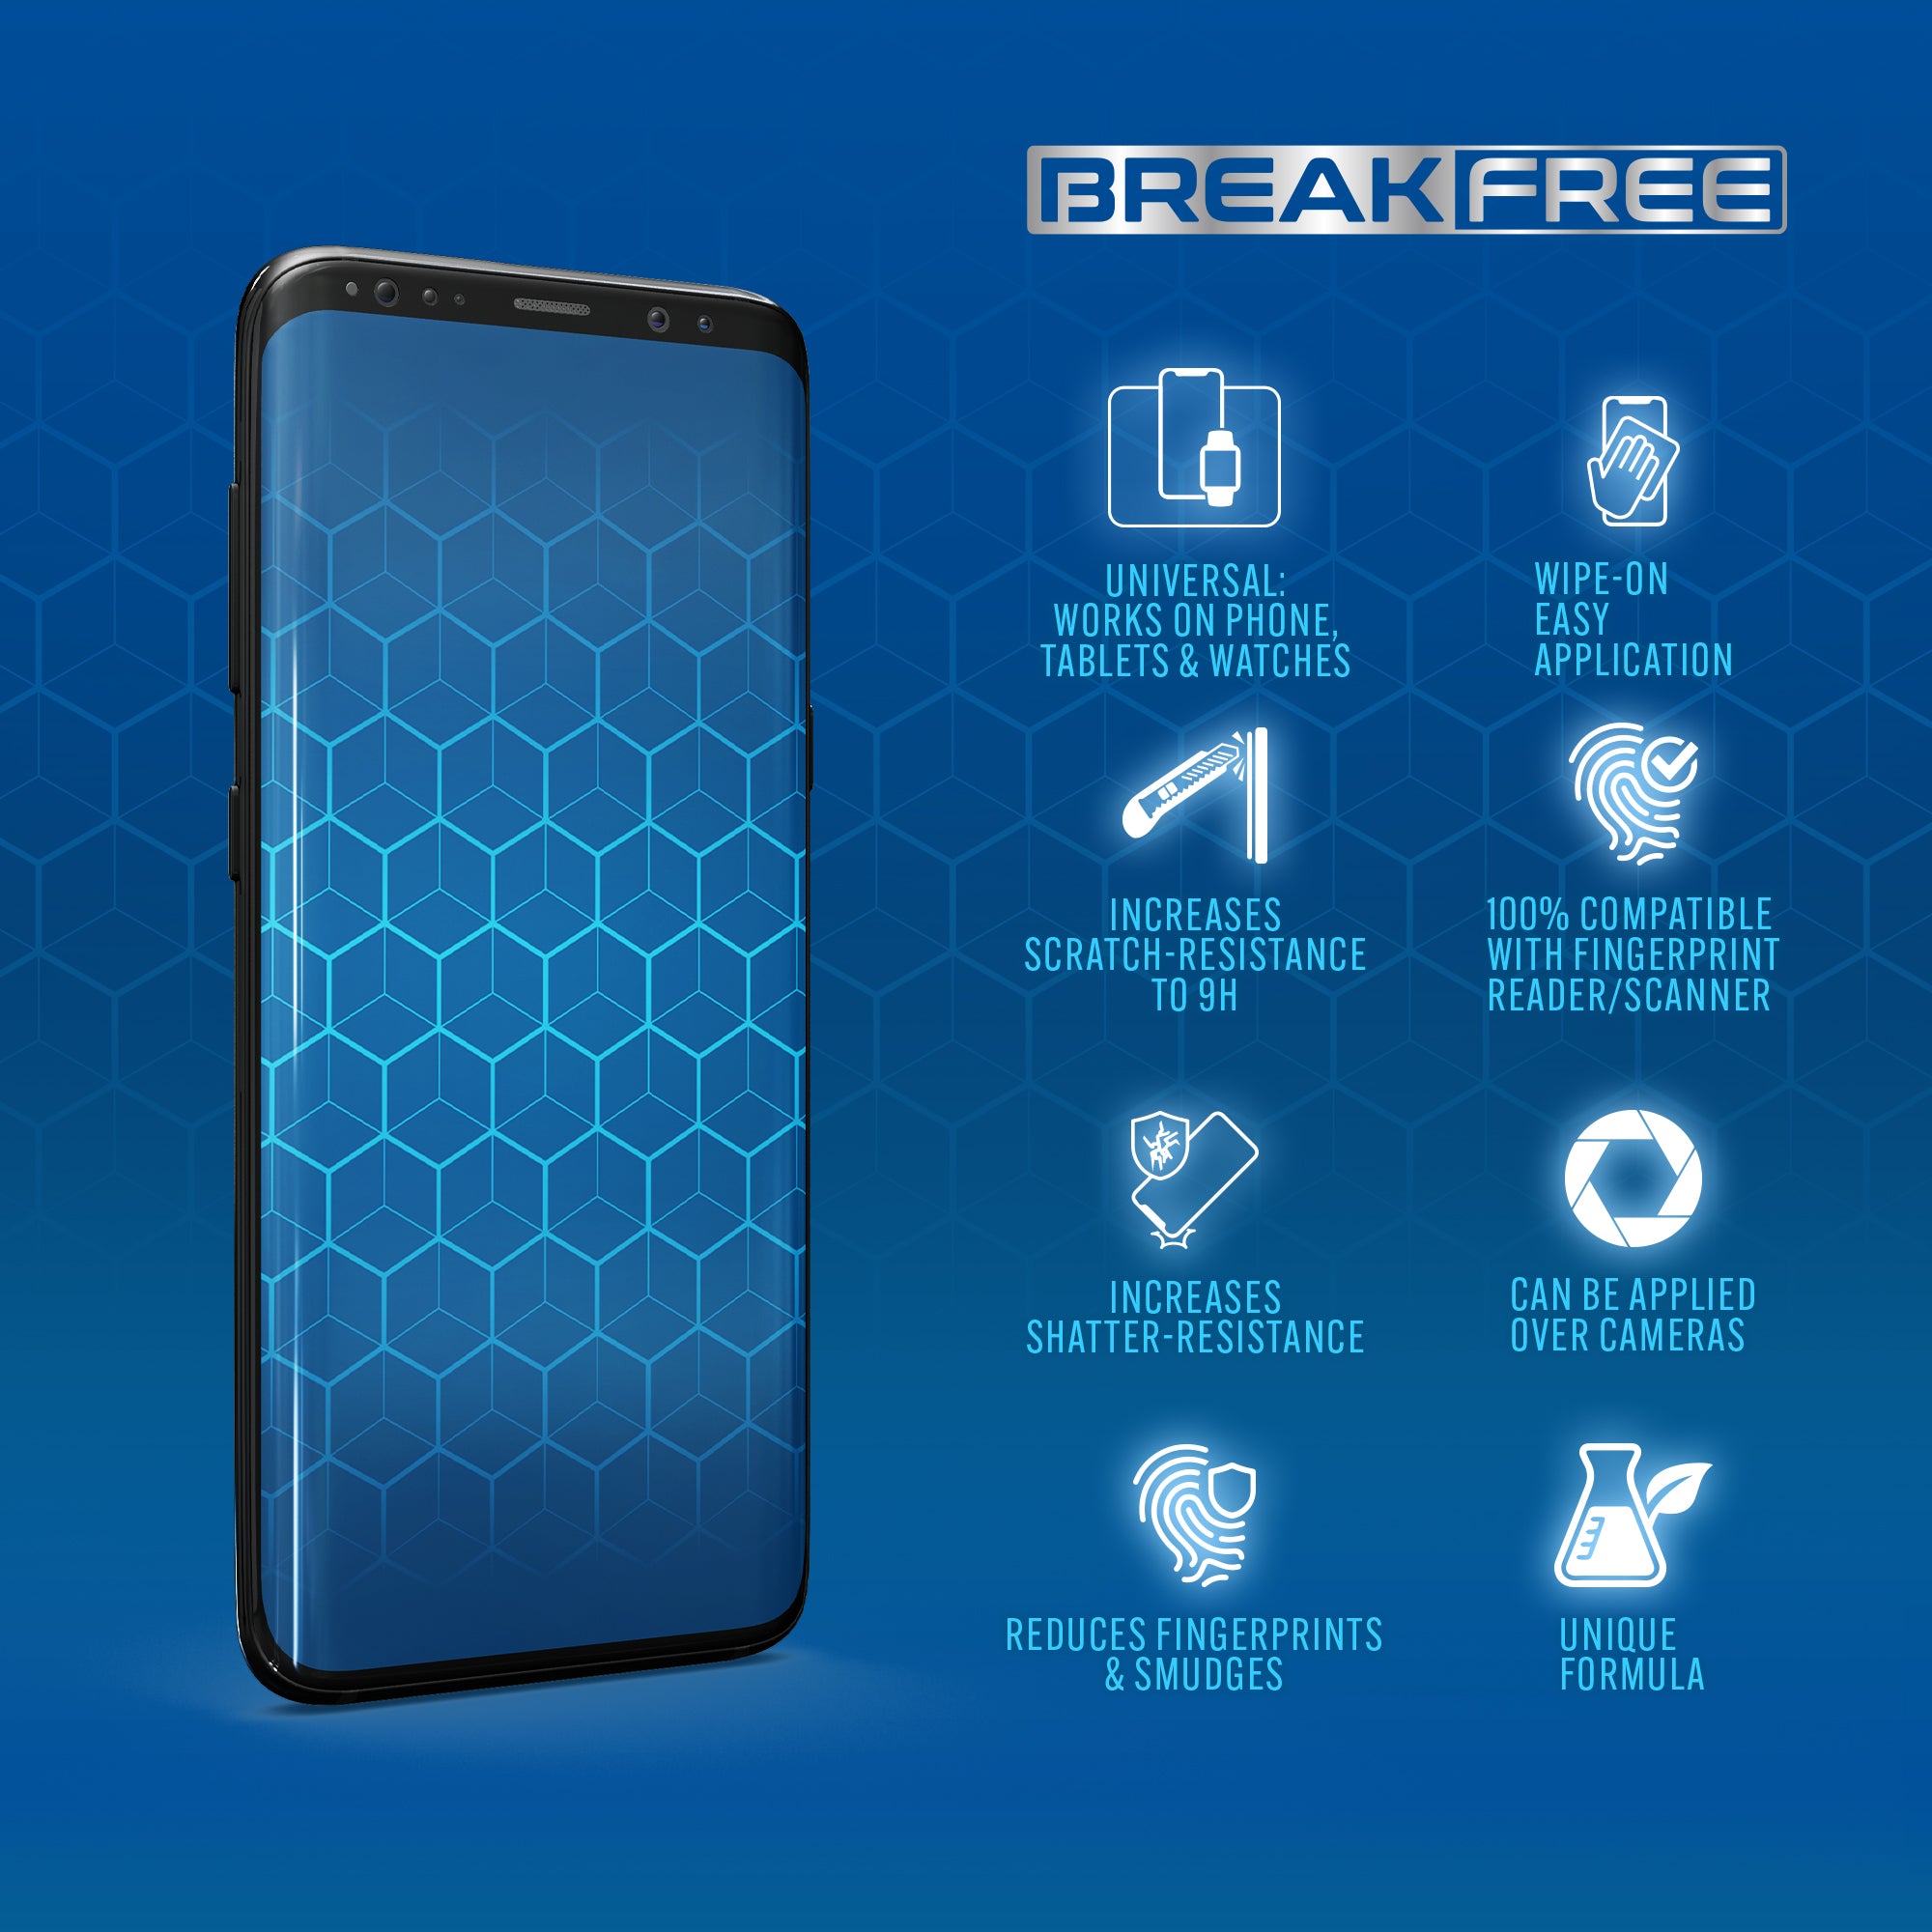 BREAK FREE Liquid Glass Screen Protector with $250 Guarantee for All Phones Tablets and Smart Watches